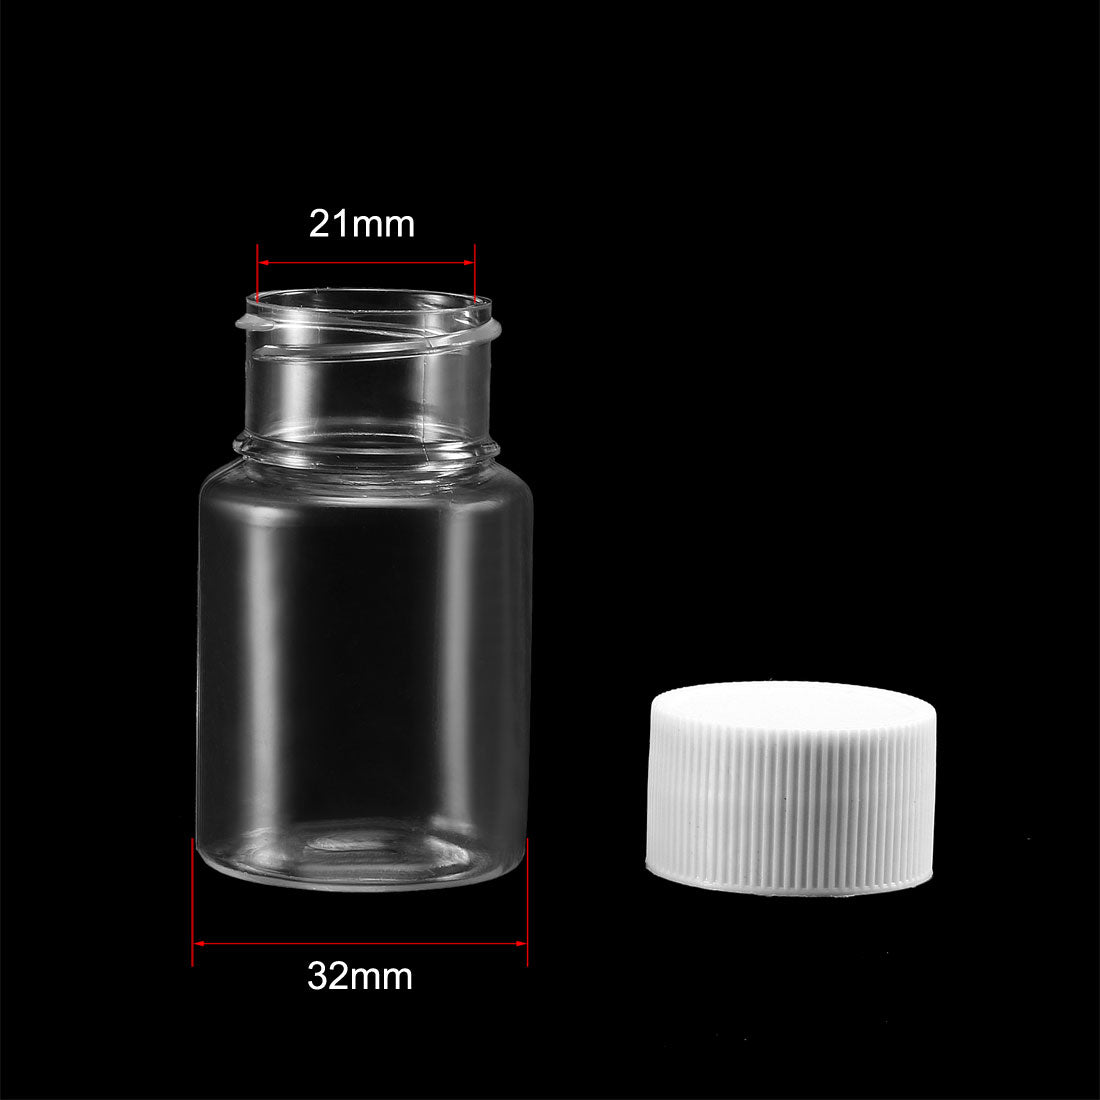 Uxcell Uxcell Plastic Lab Chemical Reagent Bottle 200ml/6.8oz Wide Mouth Sample Sealing Liquid Storage Container 10pcs